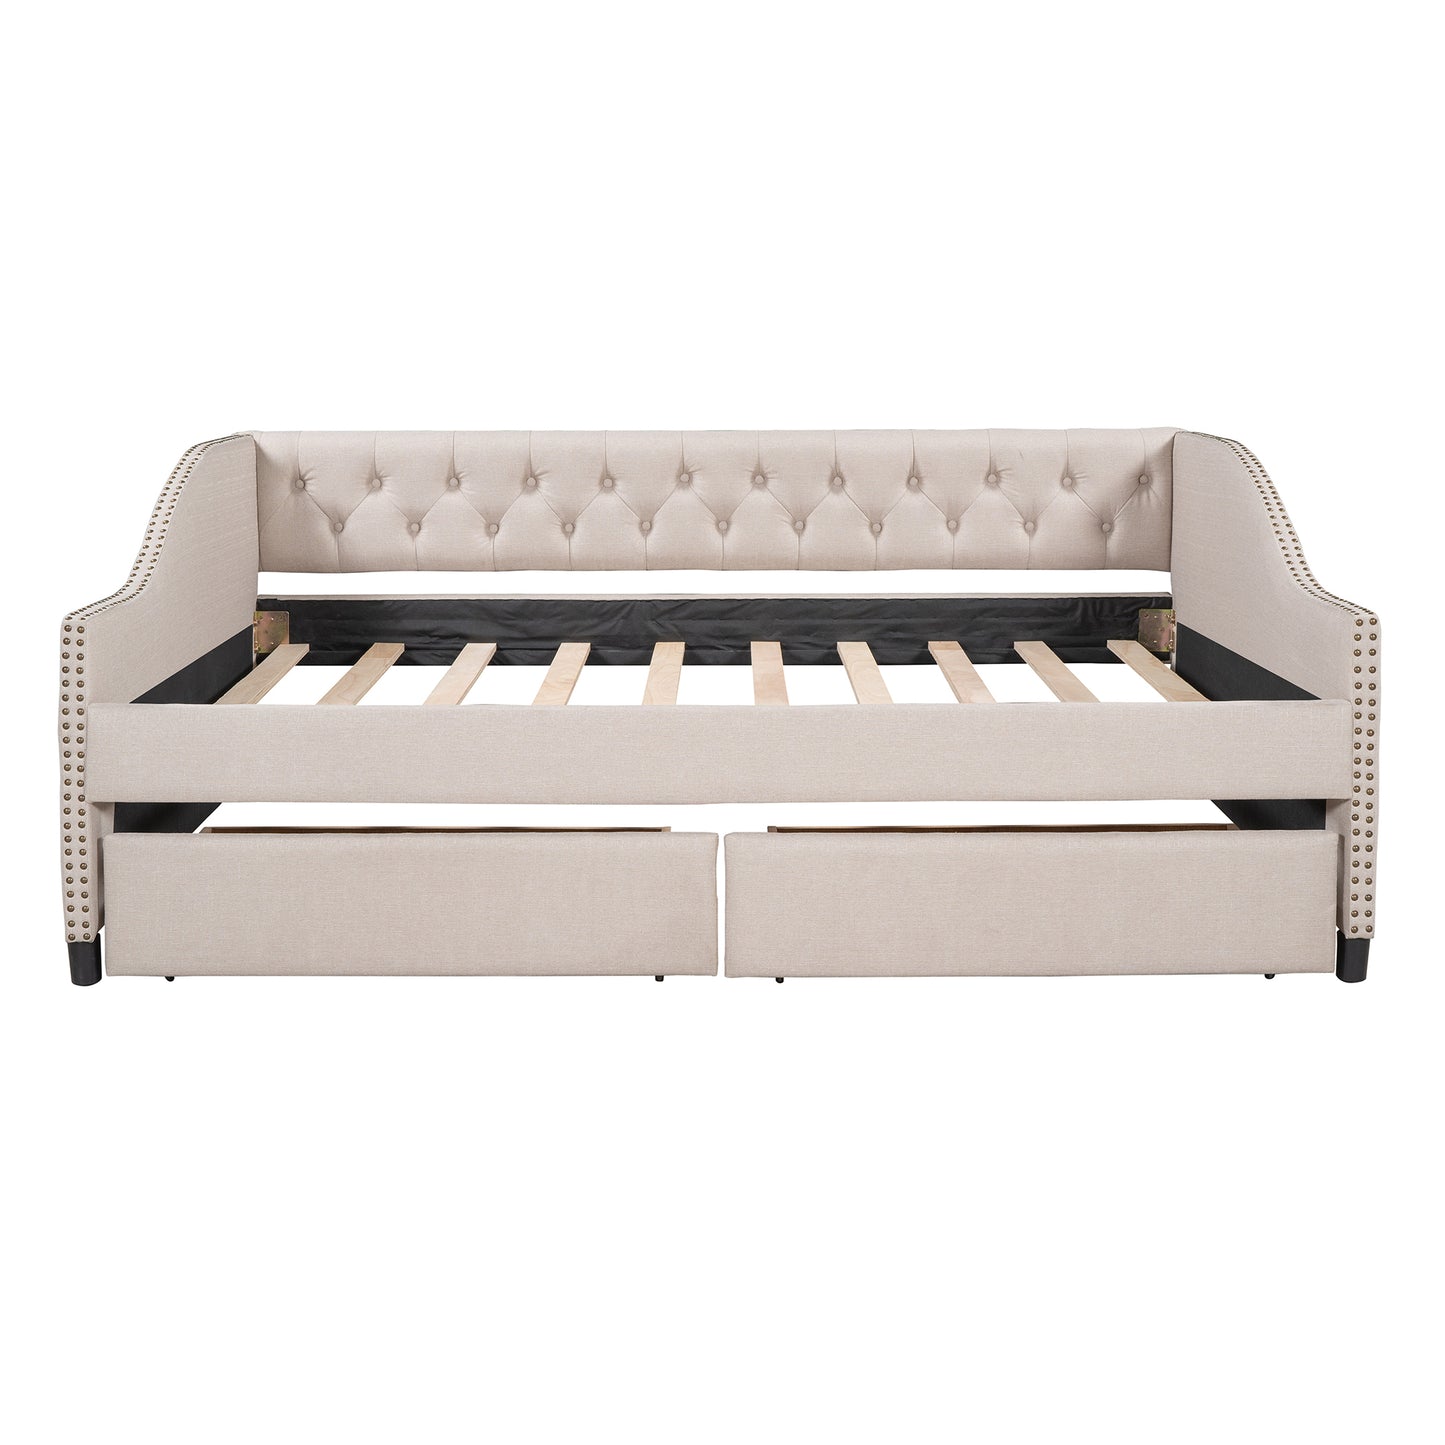 Upholstered daybed with Two Drawers, Wood Slat Support, Beige, Full Size